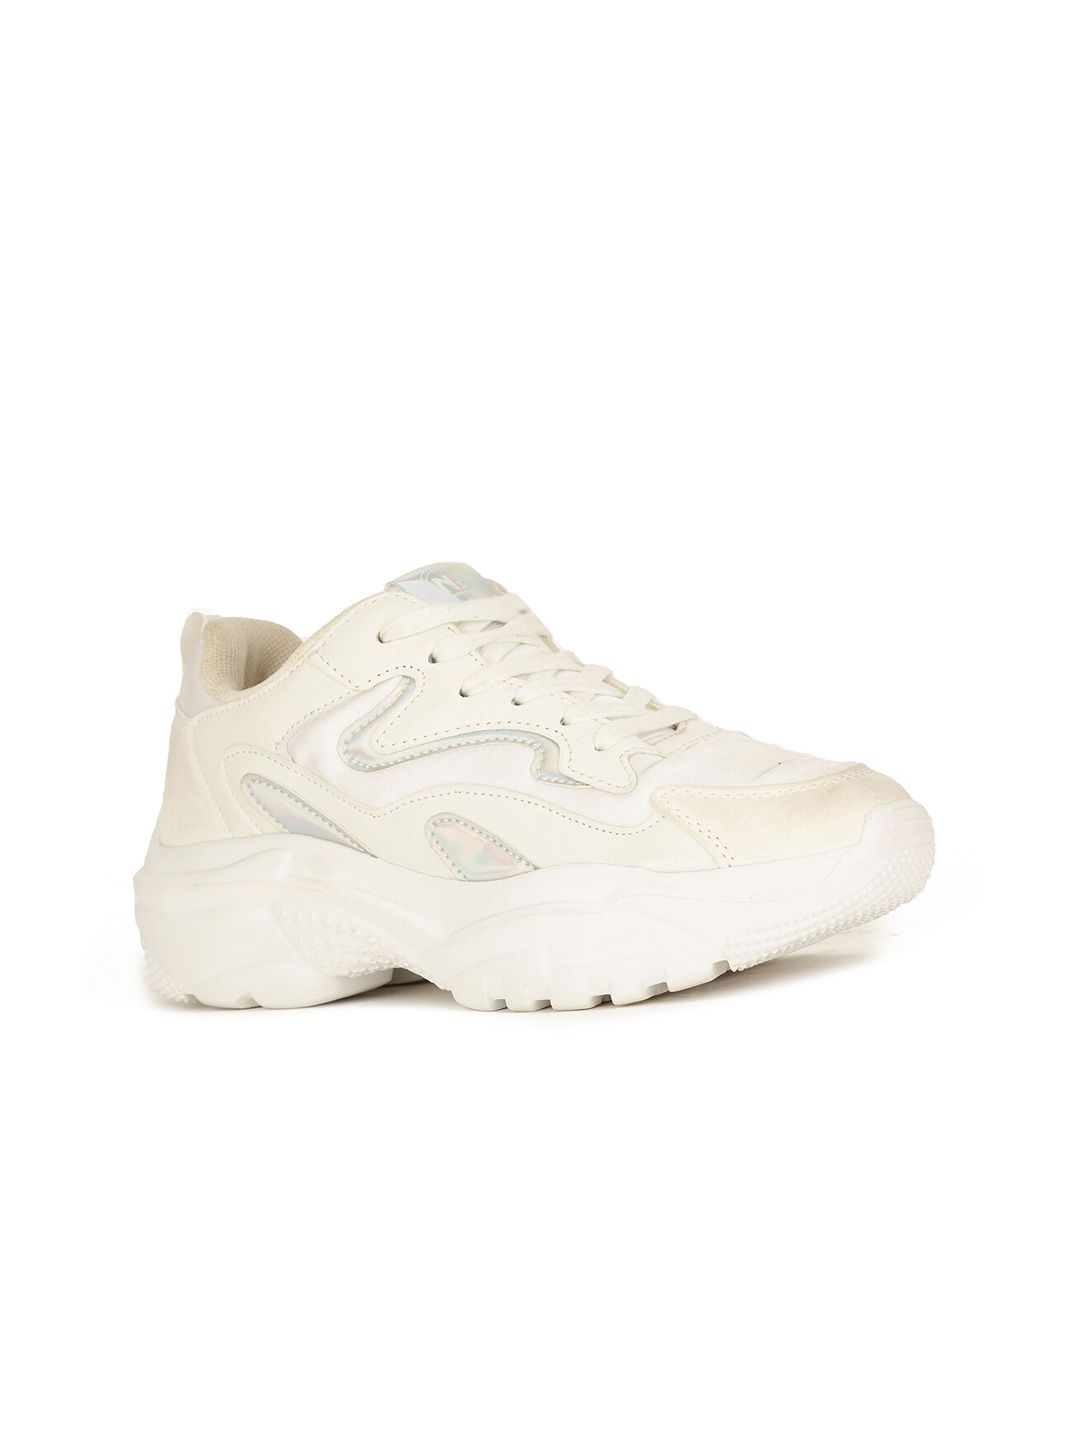 North Star Women White Sneakers Price in India